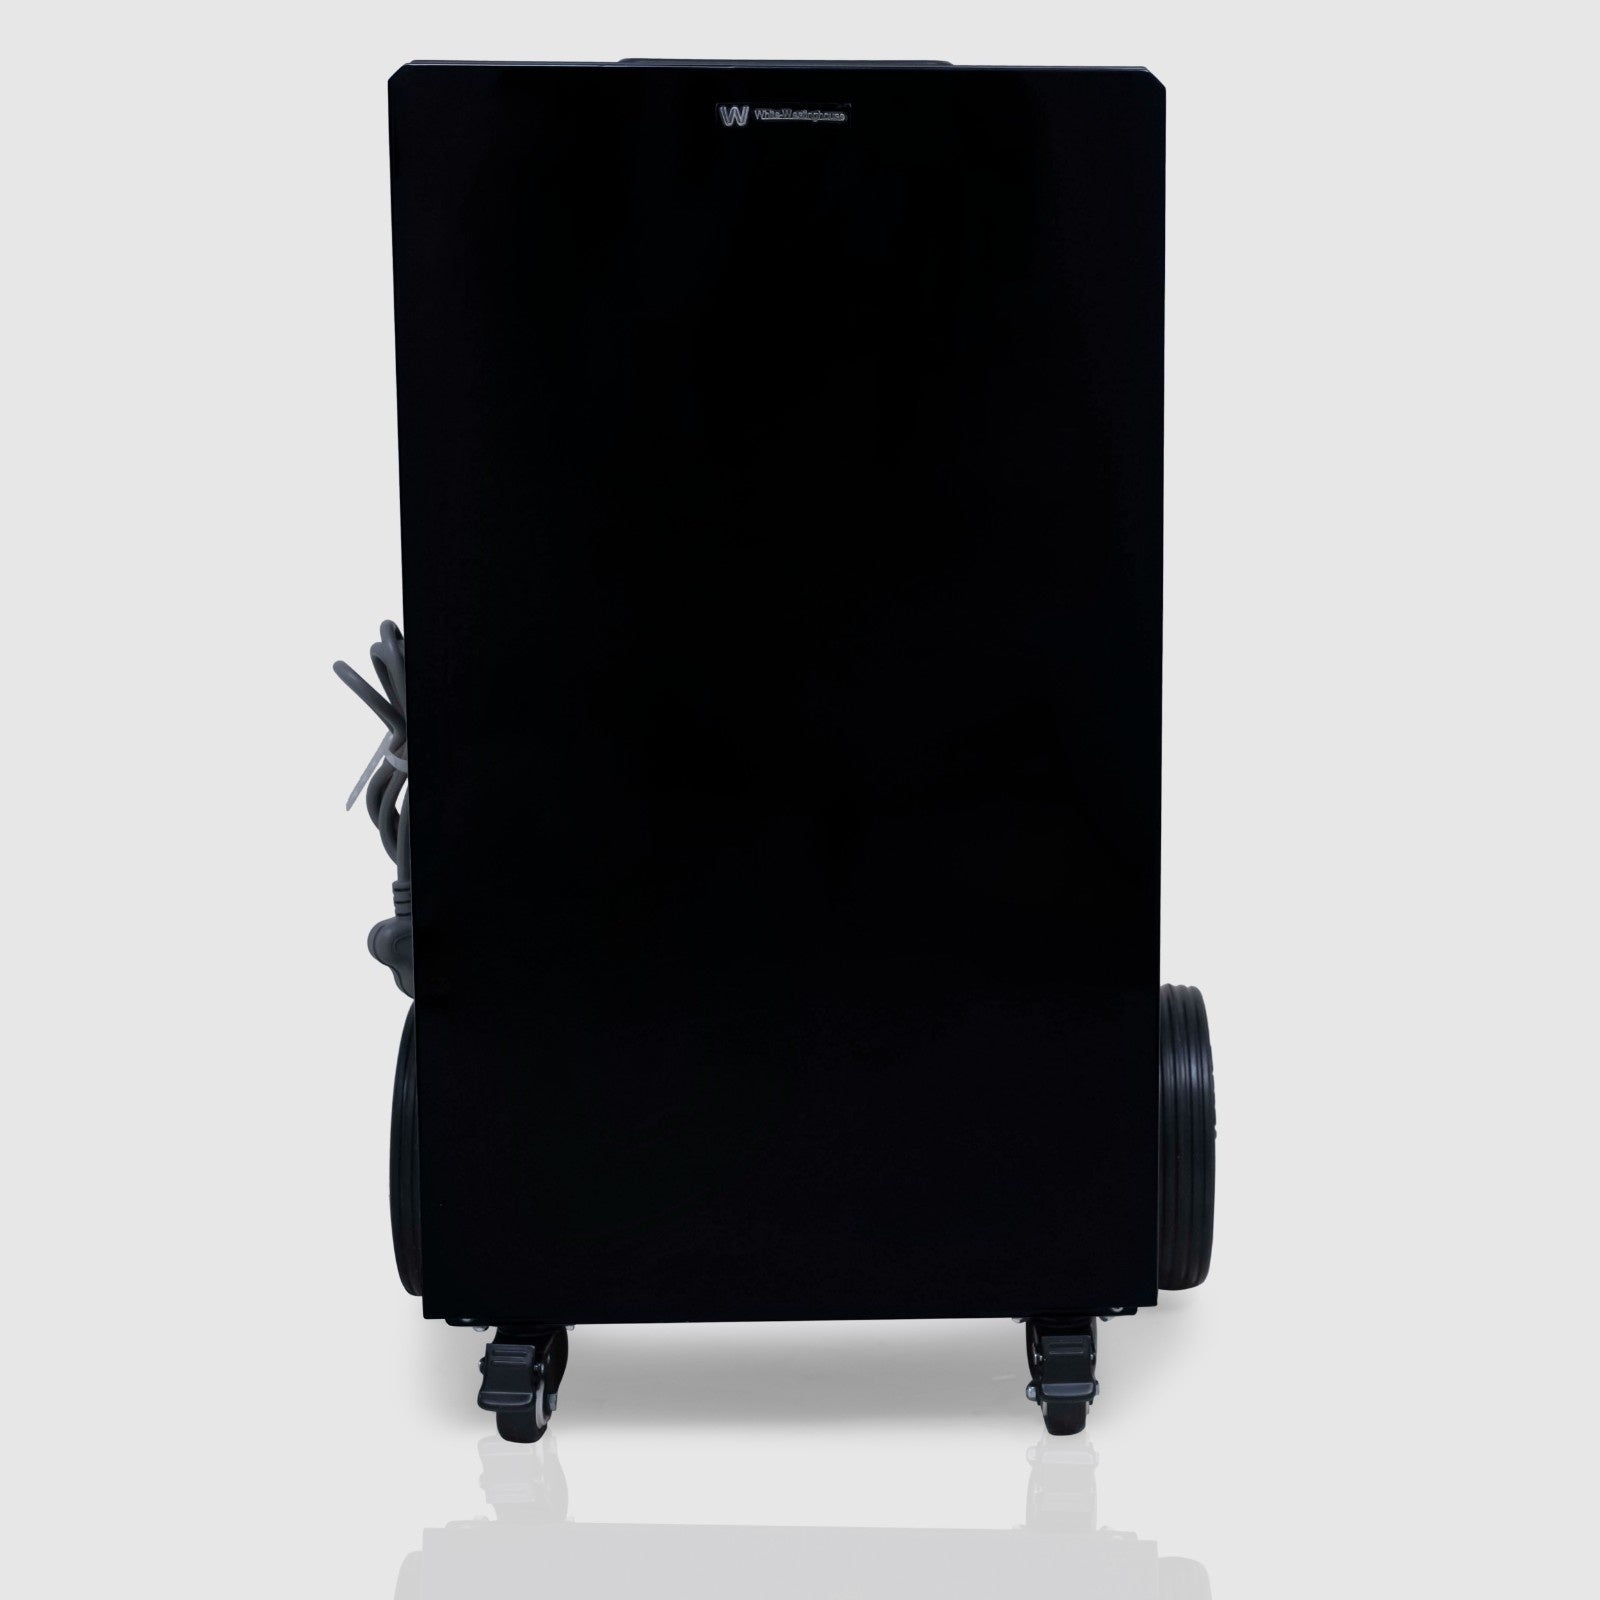 Front view of the White Westinghouse Industrial Dehumidifier WDE100, featuring a sleek black design with large rear wheels and front casters for easy mobility. The power cord is neatly wrapped on the side, making it ideal for large commercial and industrial spaces.